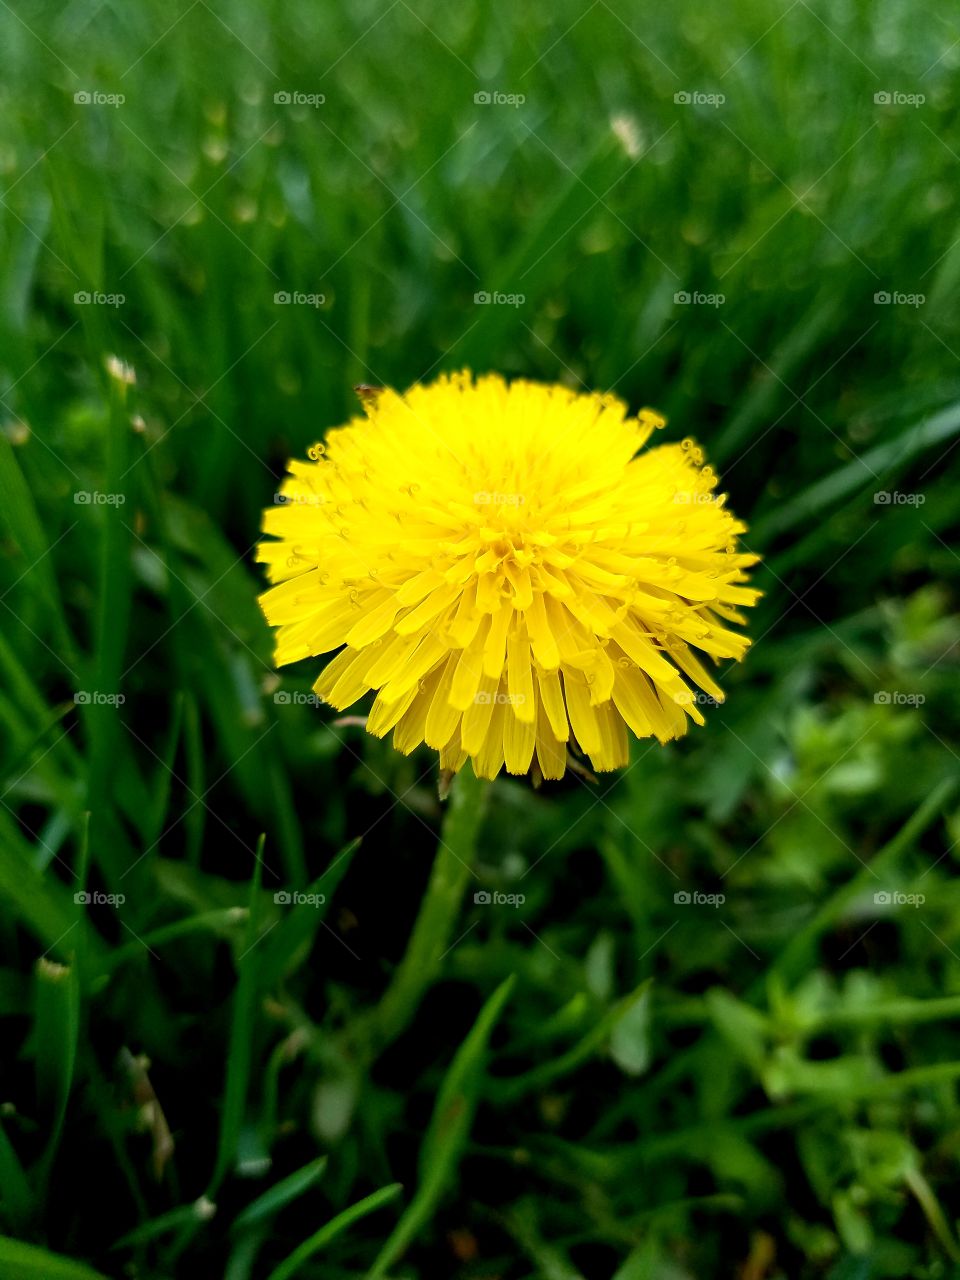 A dandelion in natural light up close and personal.